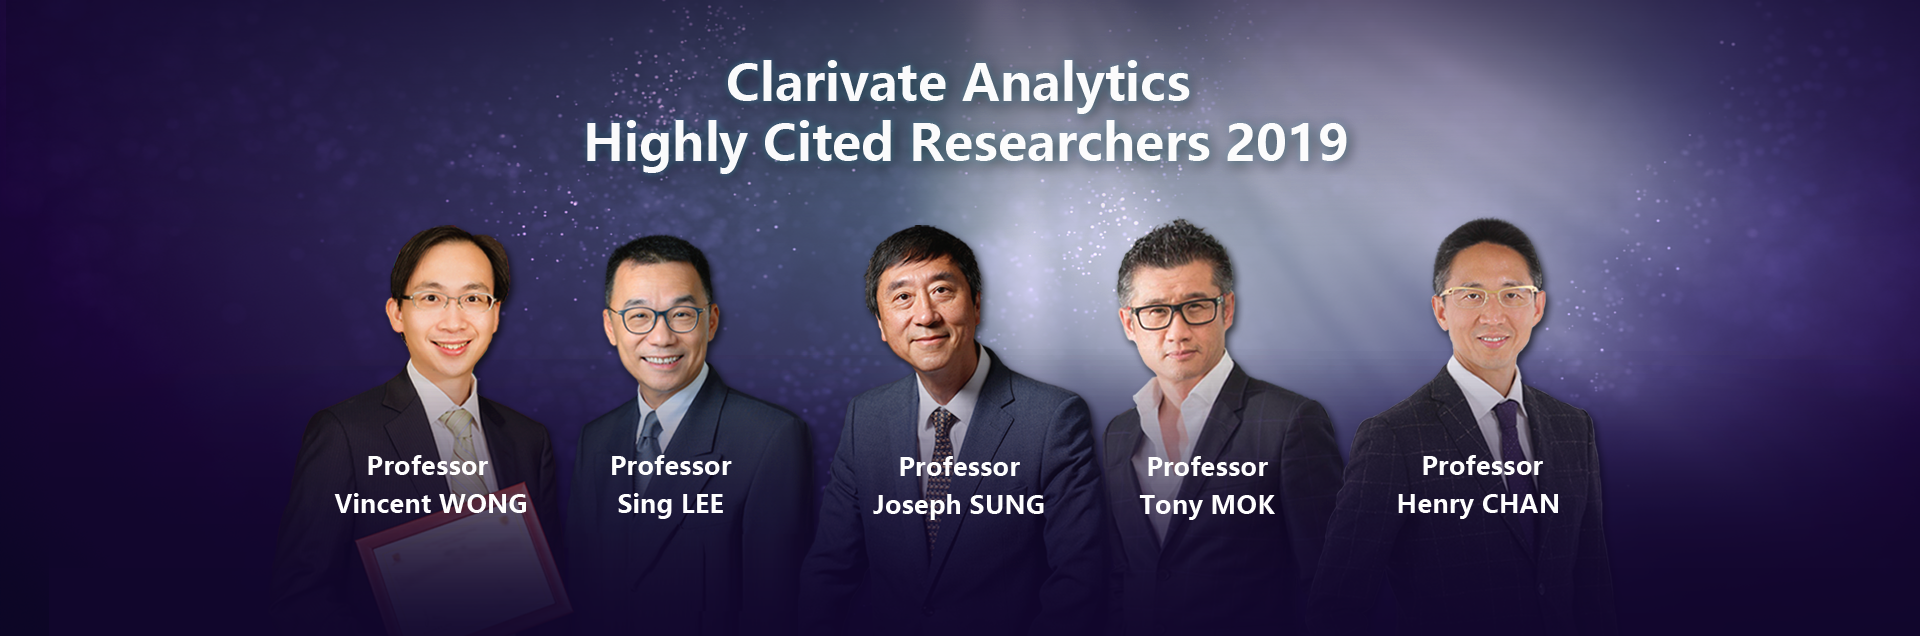 Clarivate Analytics Highly Cited Researchers 2019